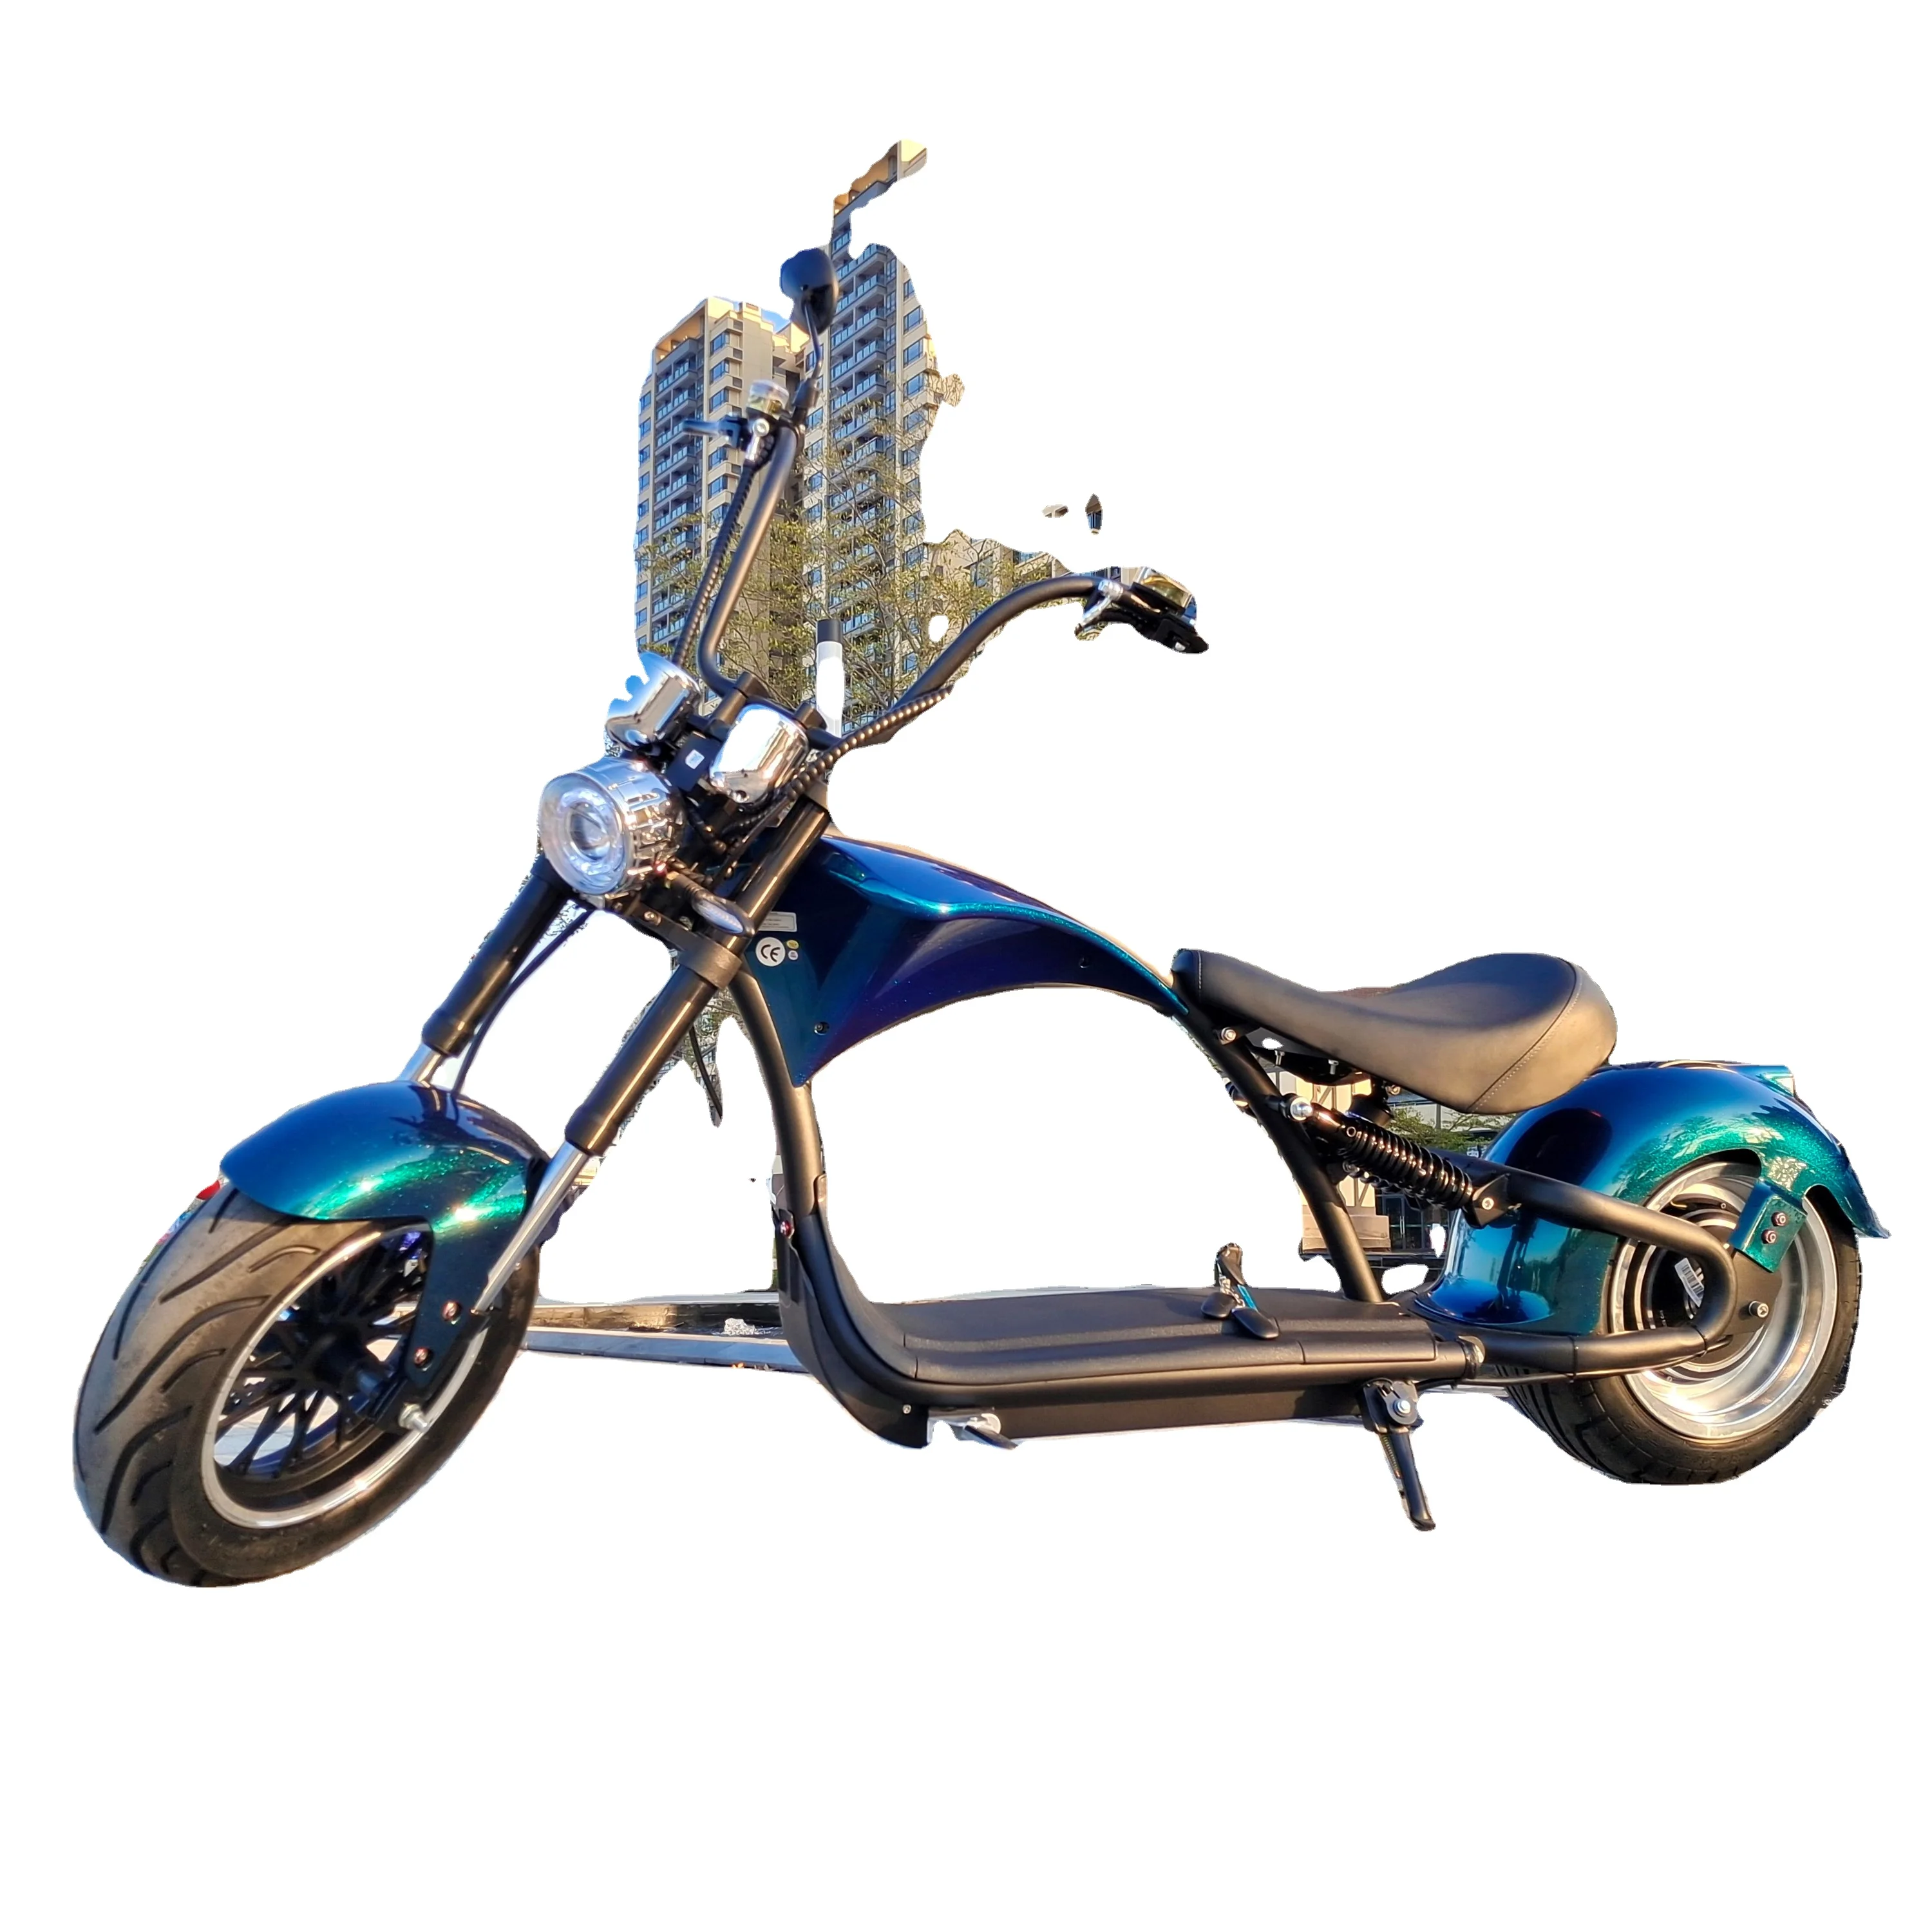 

EU Electric Scooter 30Ah Removable Battery Long Range Moped E Chopper 2000W Cycle EEC COC